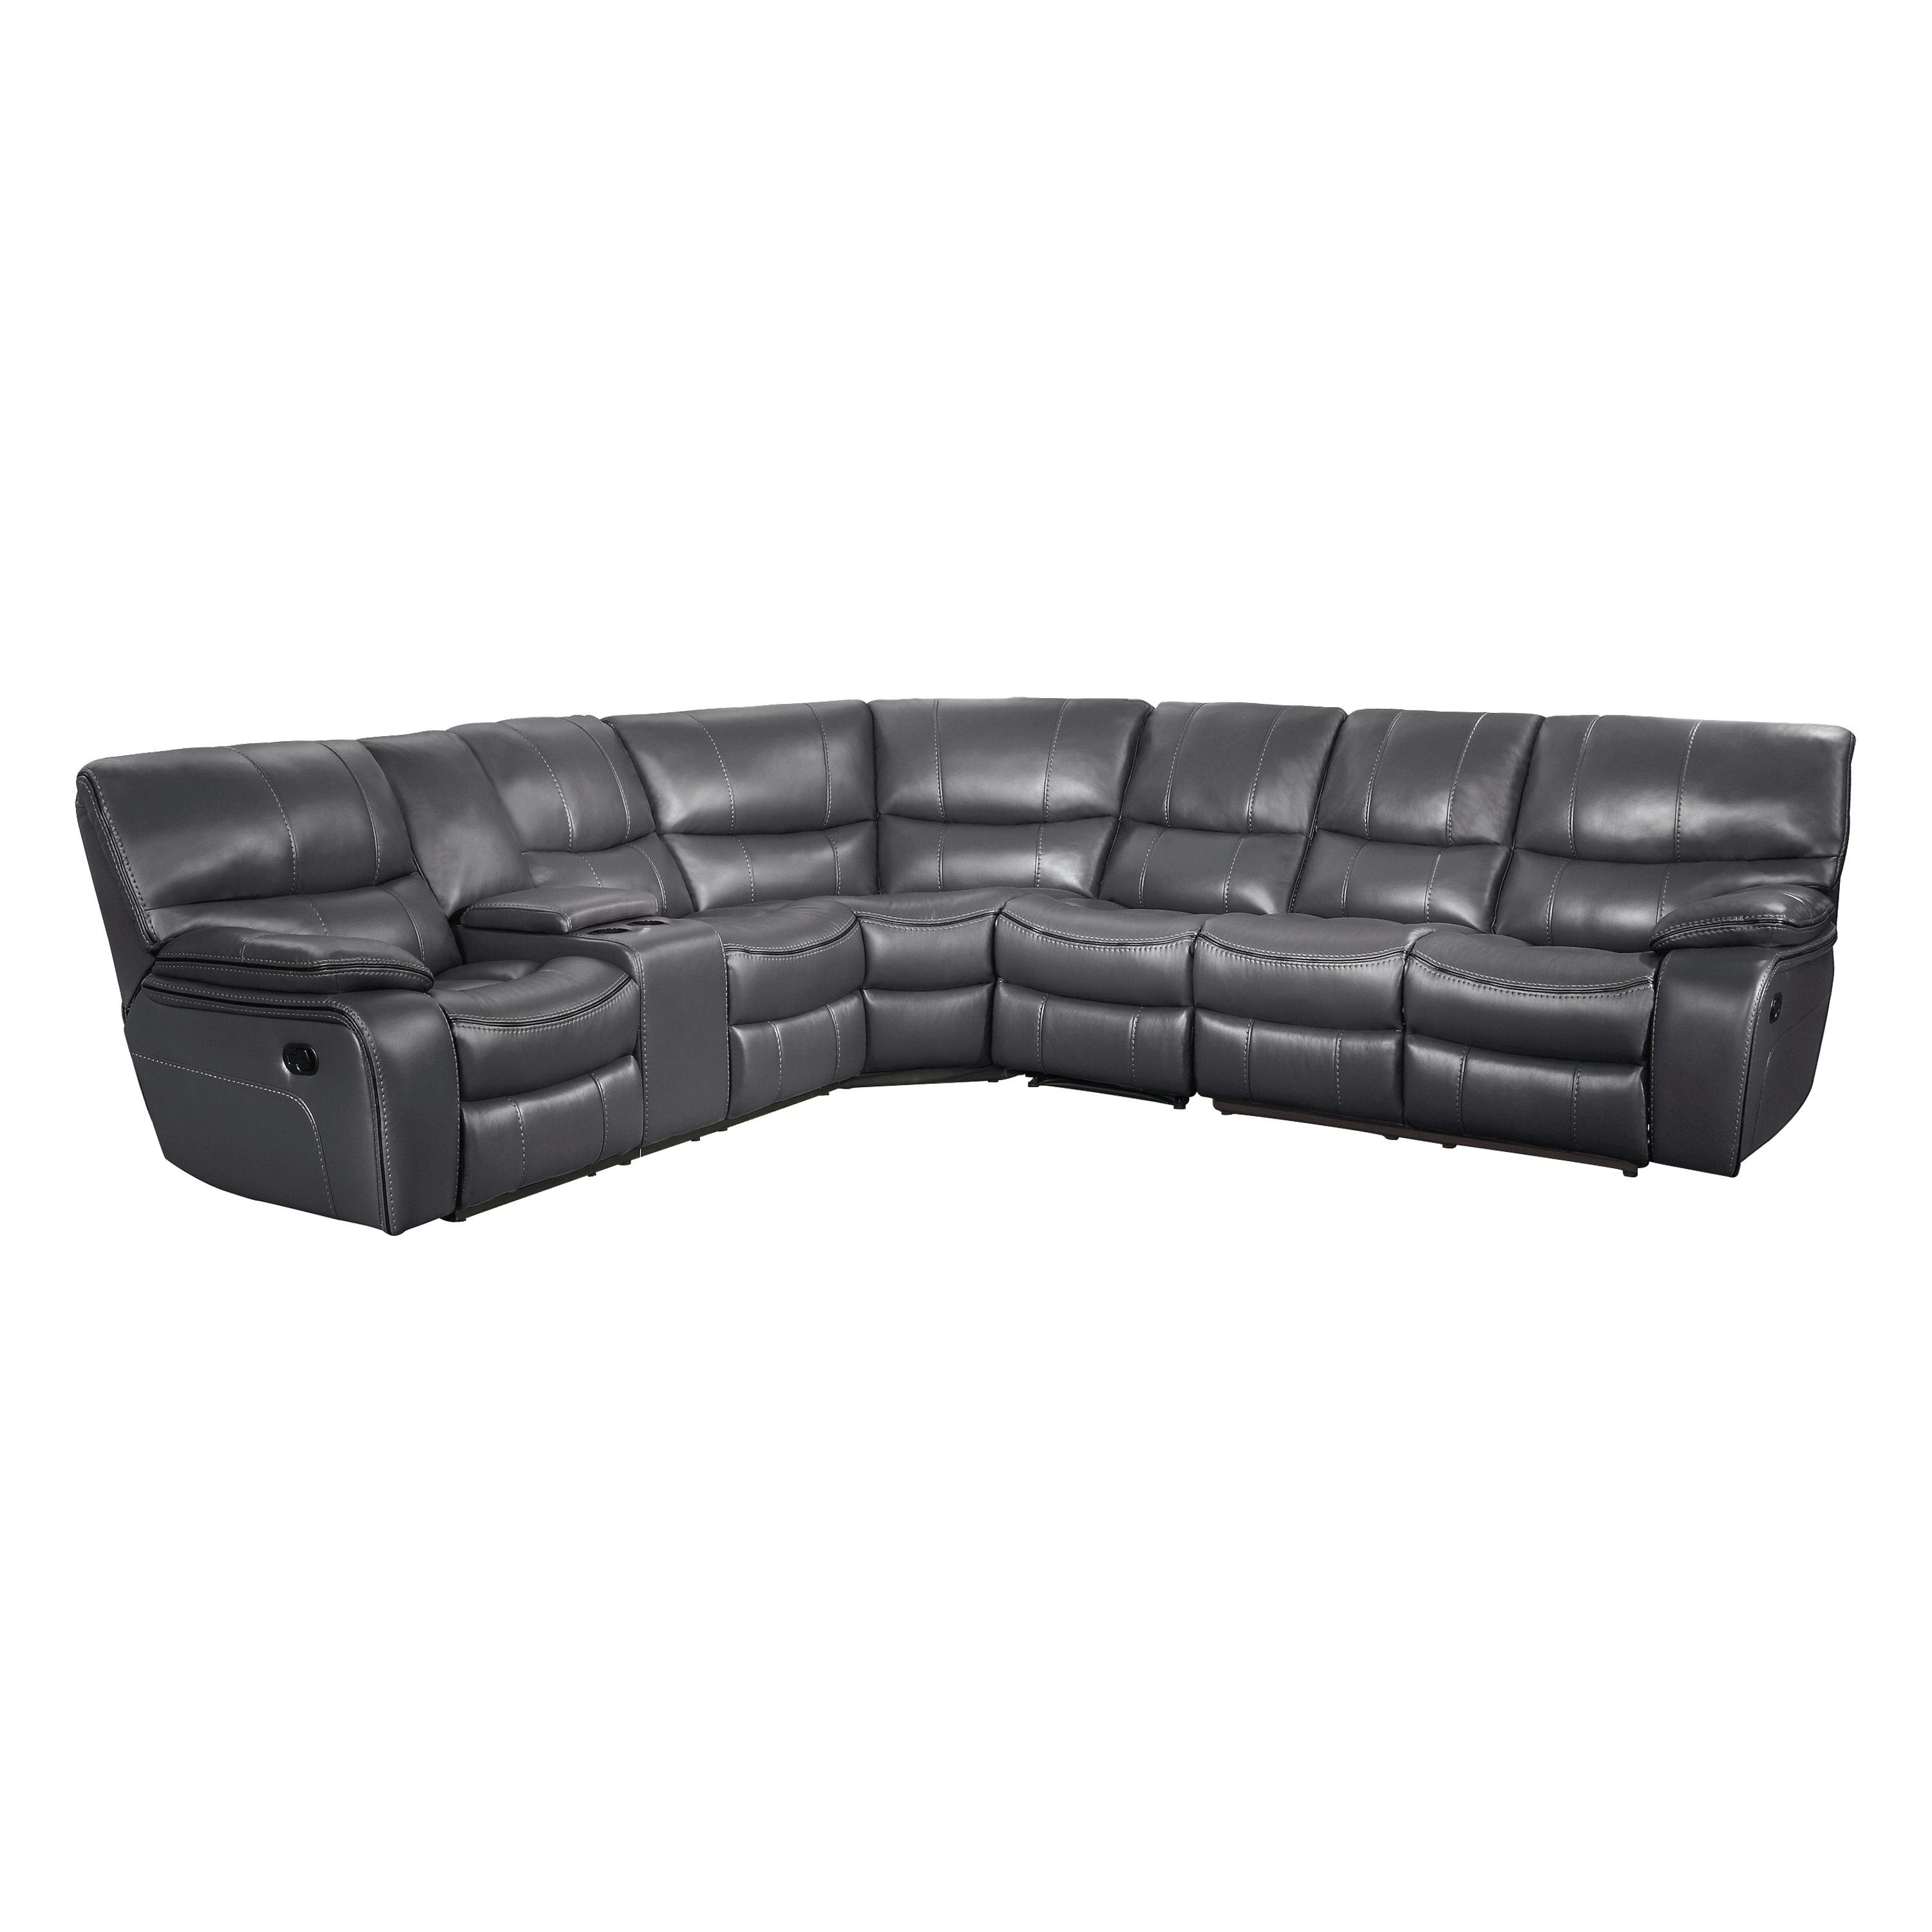 

    
Modern Gray Faux Leather 4-Piece Reclining Sectional Homelegance 8480GRY*4SC Pecos
